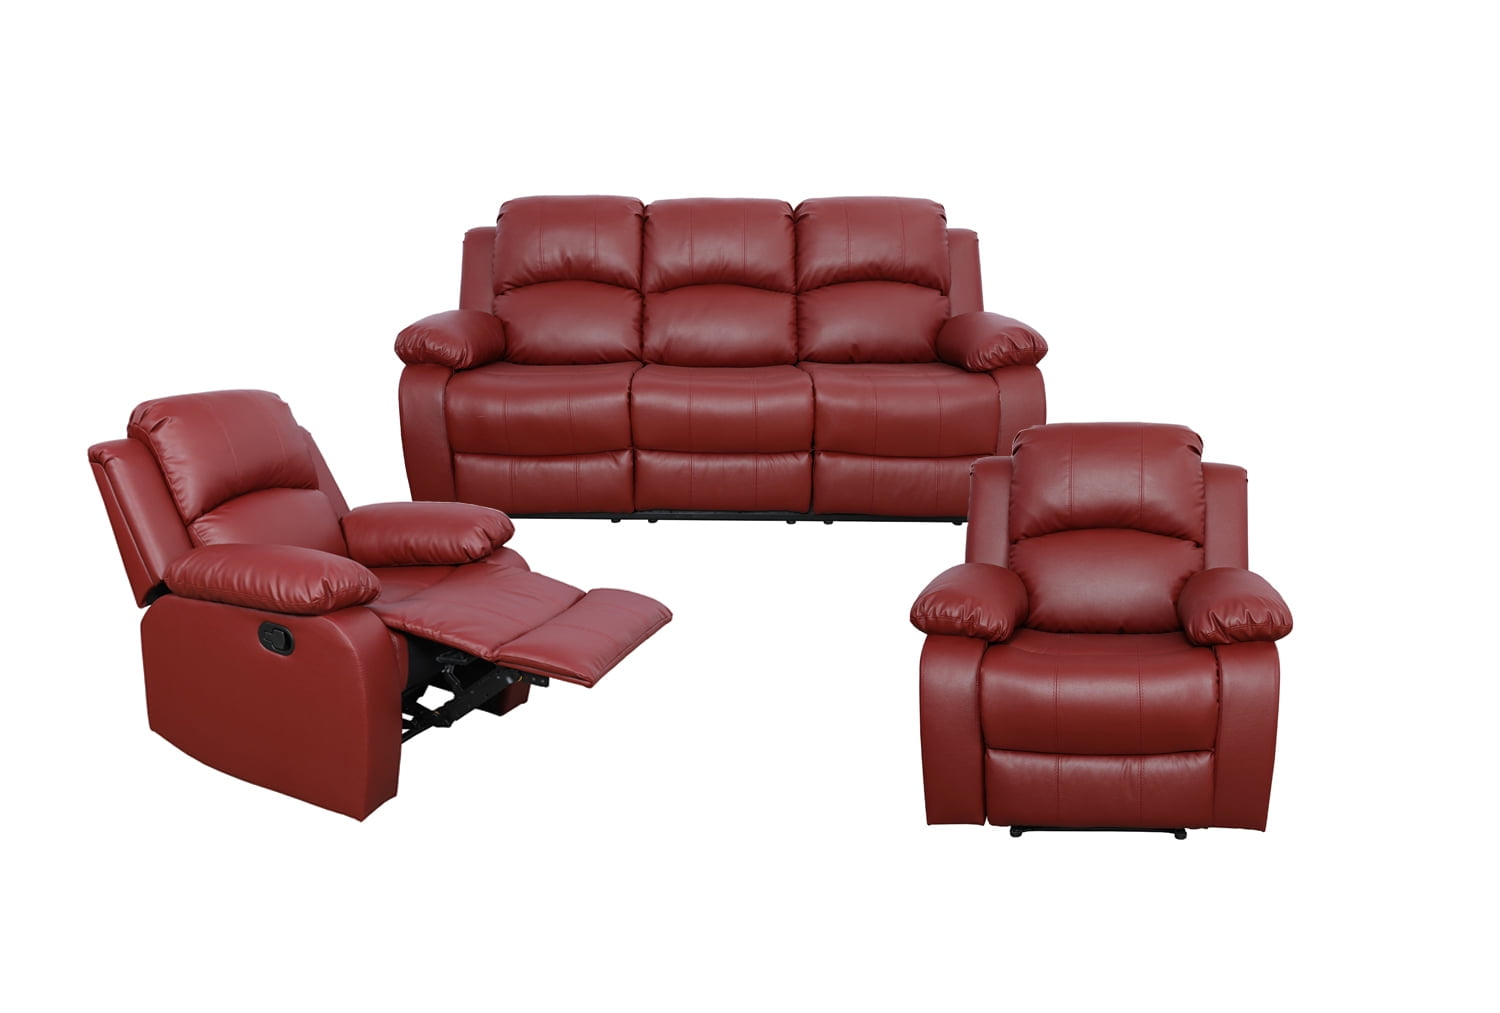 Red Leather Reclining Sofa Chair Set, Red Leather Couch And Chair Set